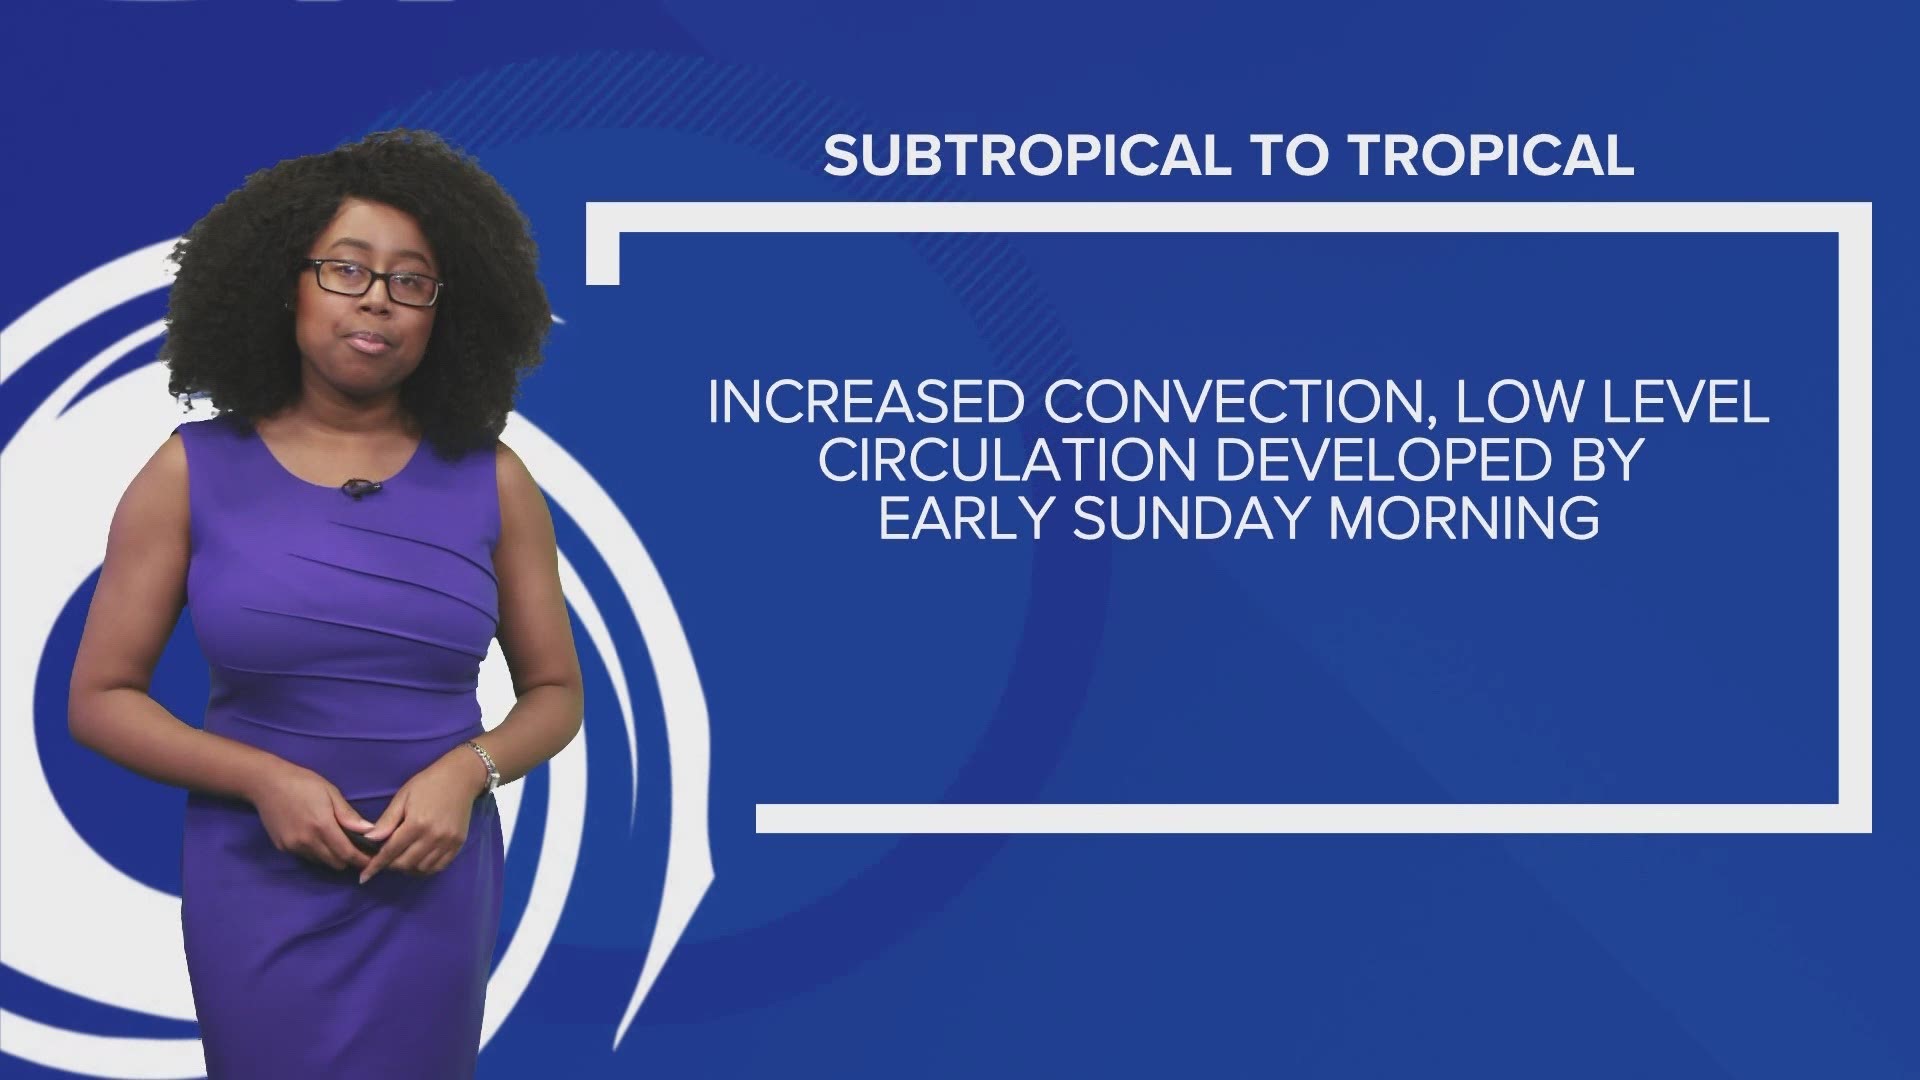 Tropics Update on May 23, 2021, from Meteorologist Rachael Peart.